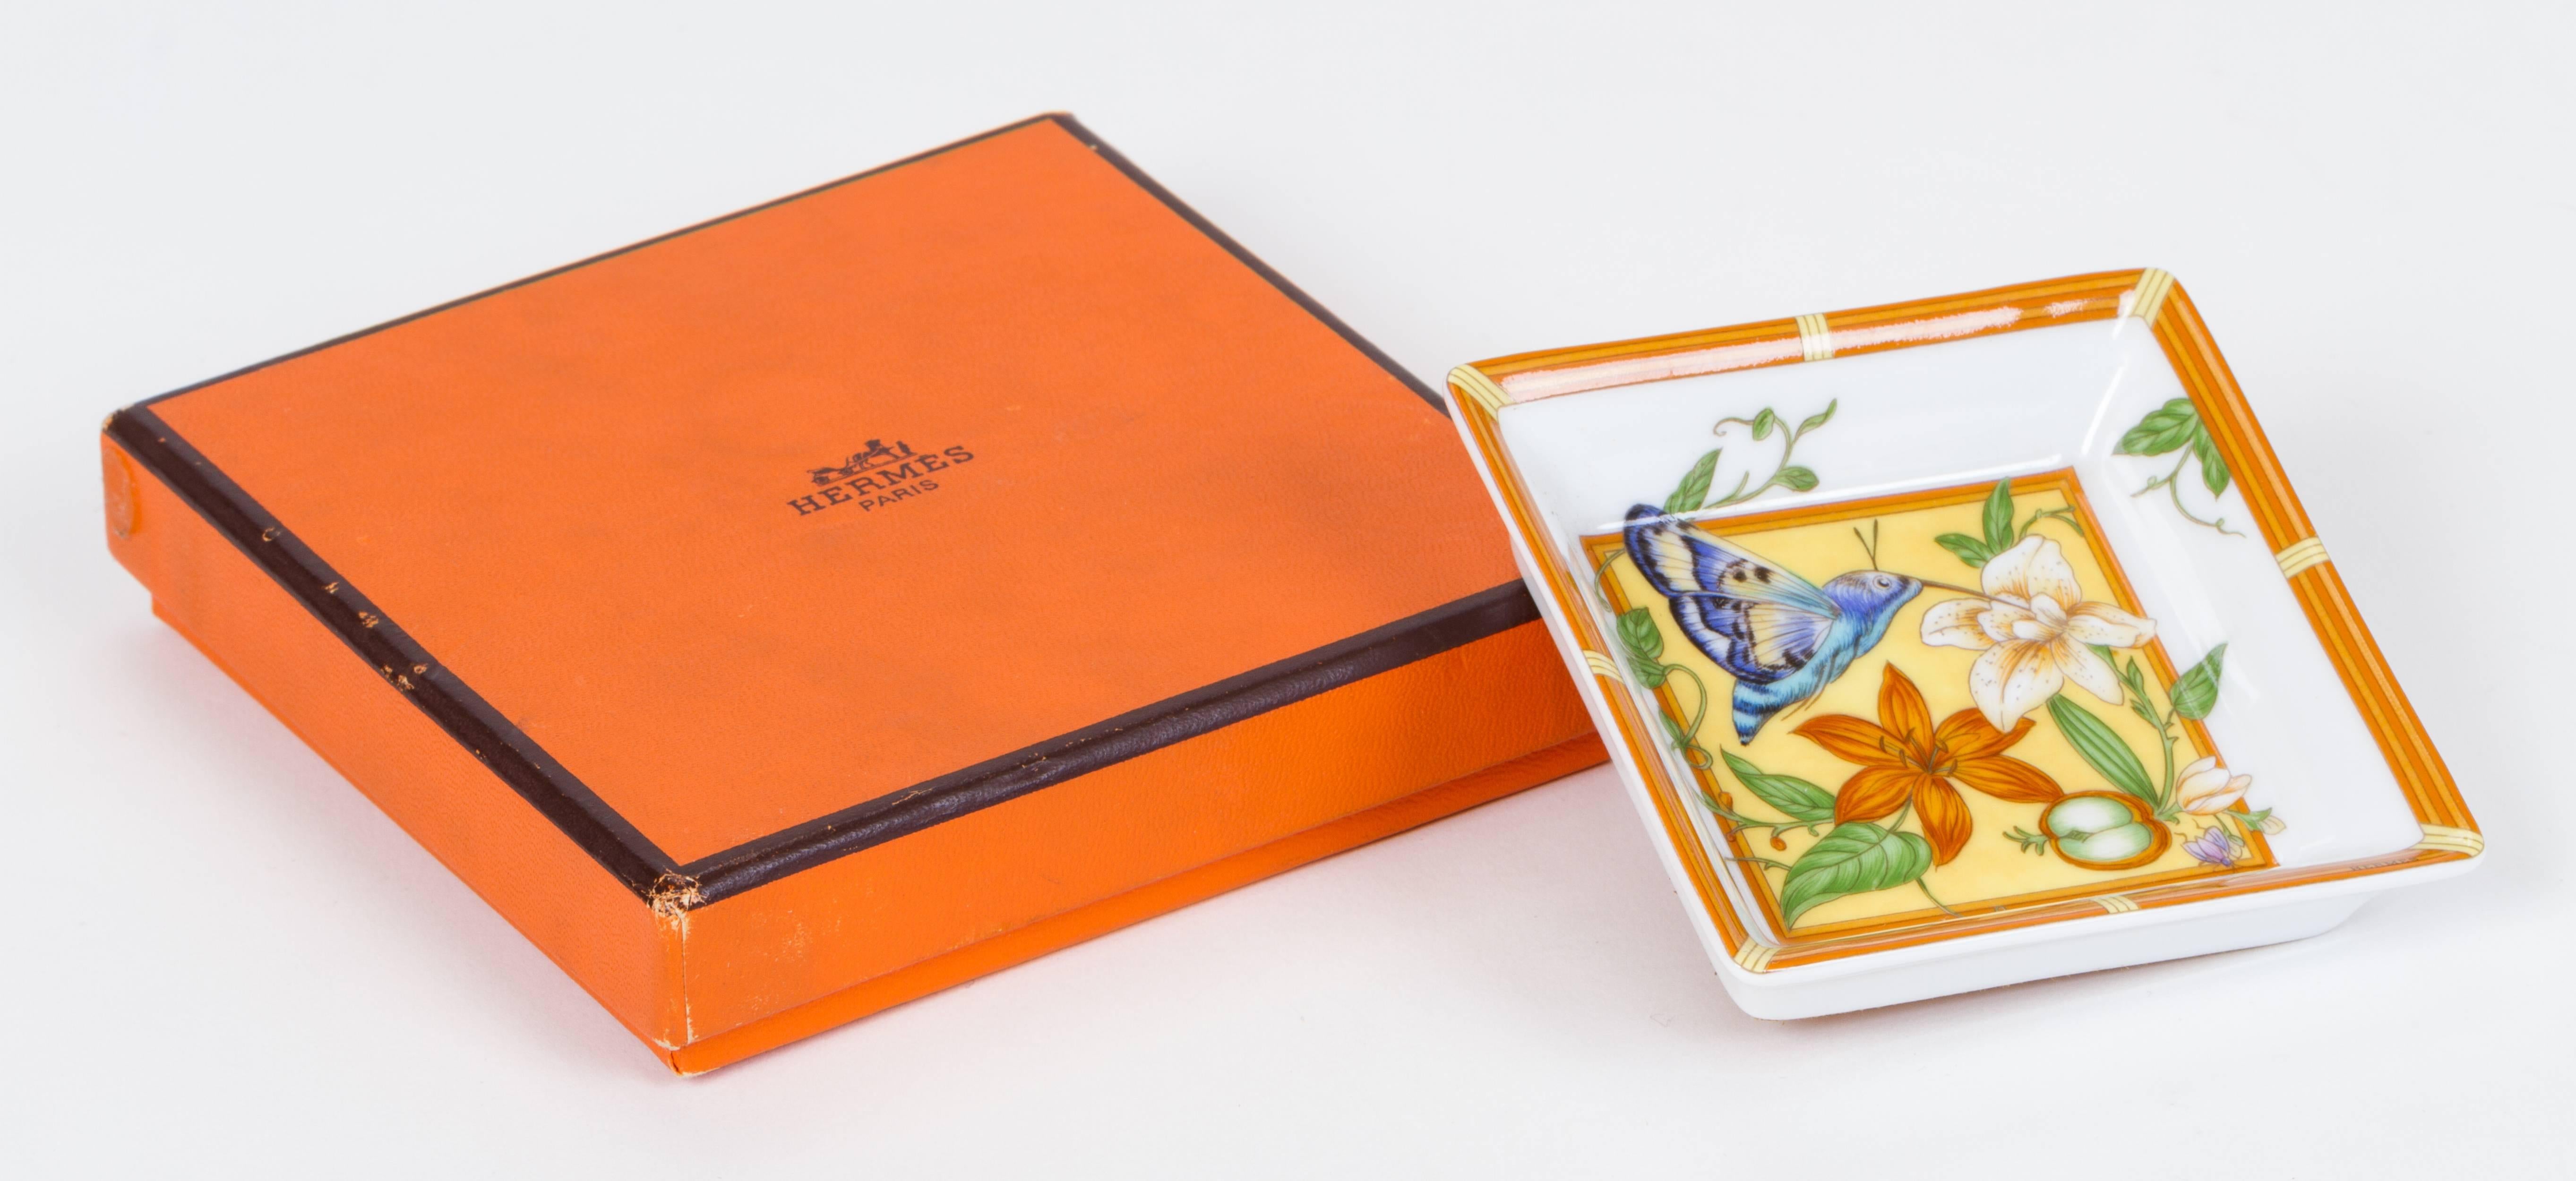 Hermès small single tray with butterflies and flowers design. Comes in original box.